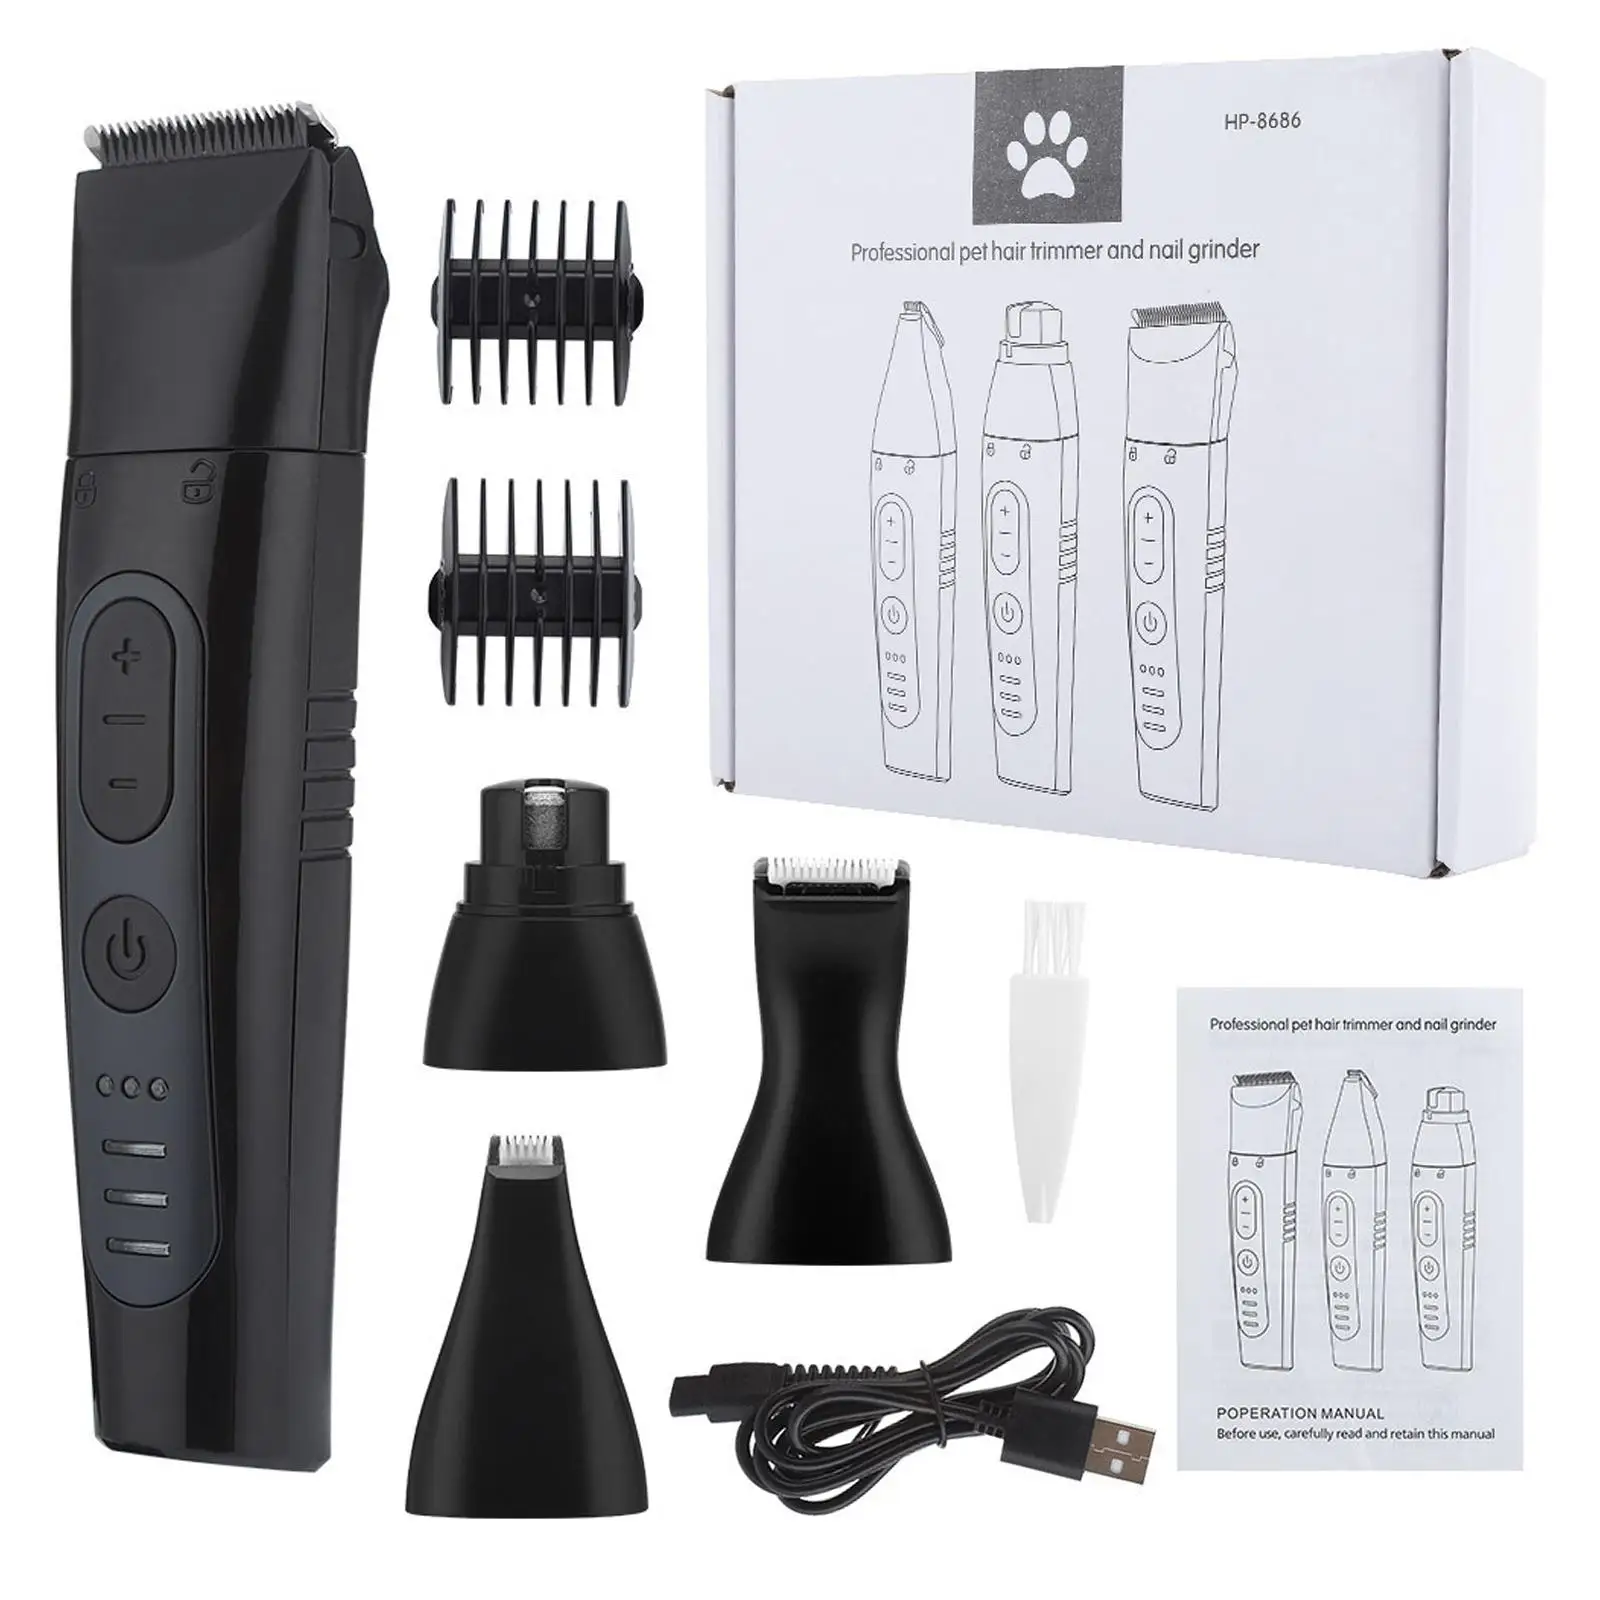 Dog Clipper Grooming Trimmer Animal Hair Professional Electric Shaver Kit